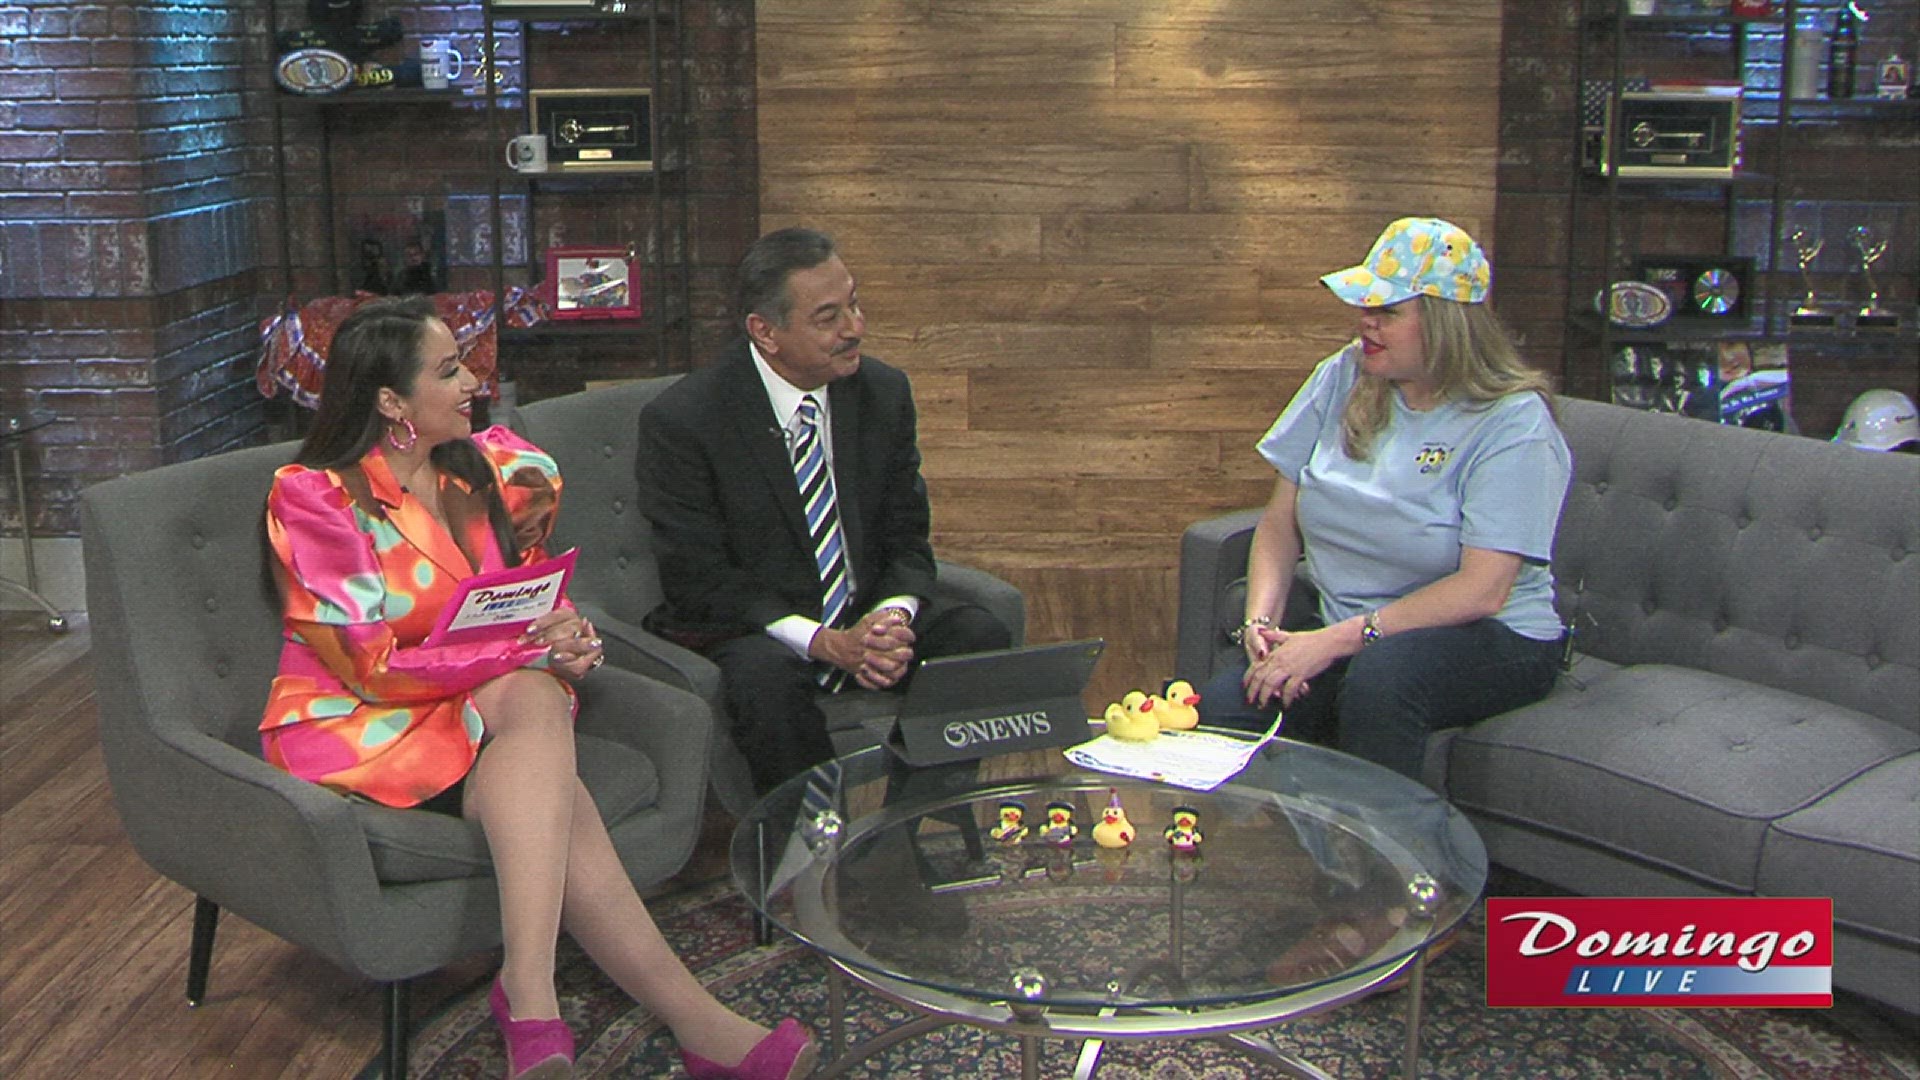 South Texas Lighthouse for the Blind joined us on Domingo Live to discuss the upcoming Rubber Duck Round-Up fundraiser benefiting the local blind community.